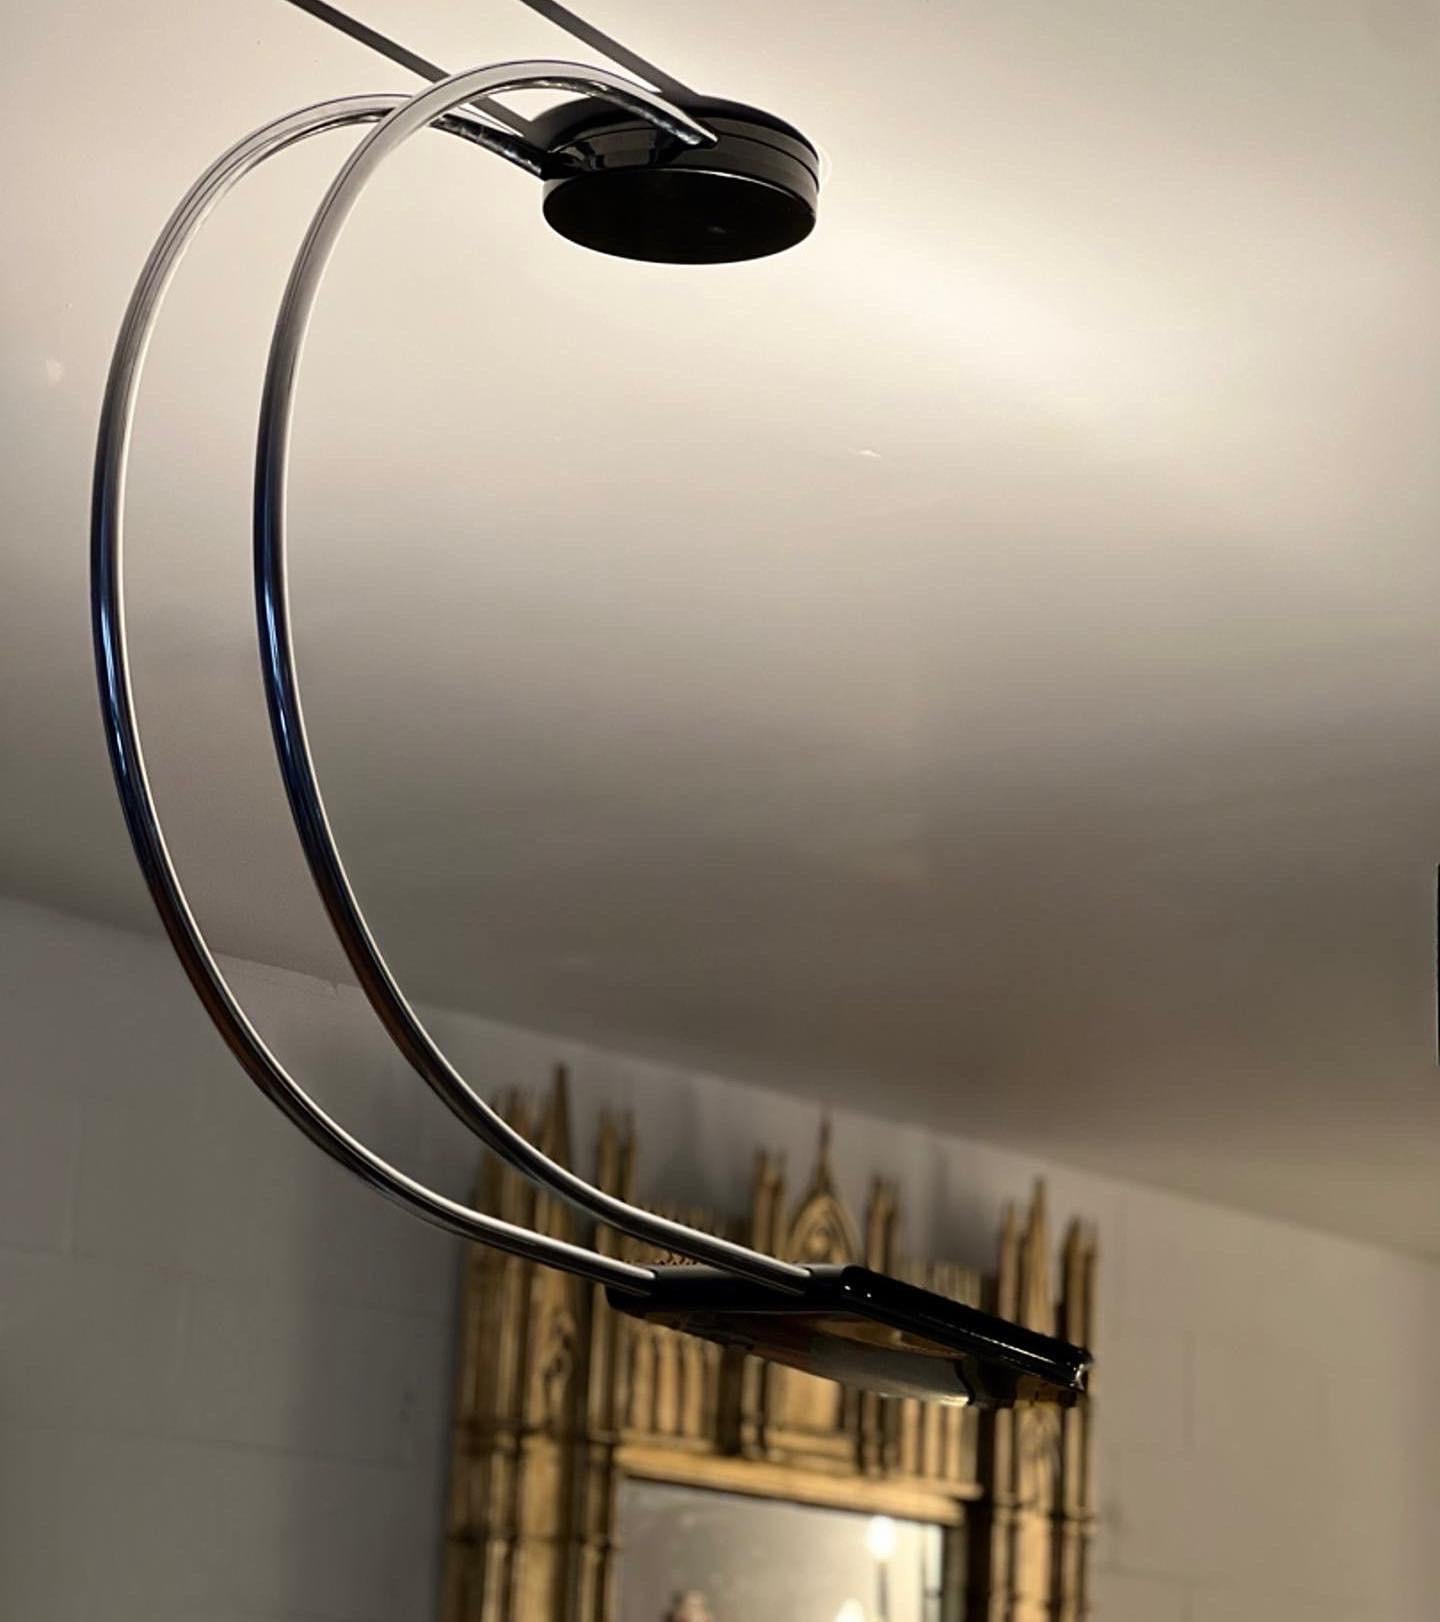 Gorgeous “Gesto” ceiling lamp by Bruno Gecchelin for Skipper. Black hood and chromed tubular body. This lamp is a real eye catcher for any interior.